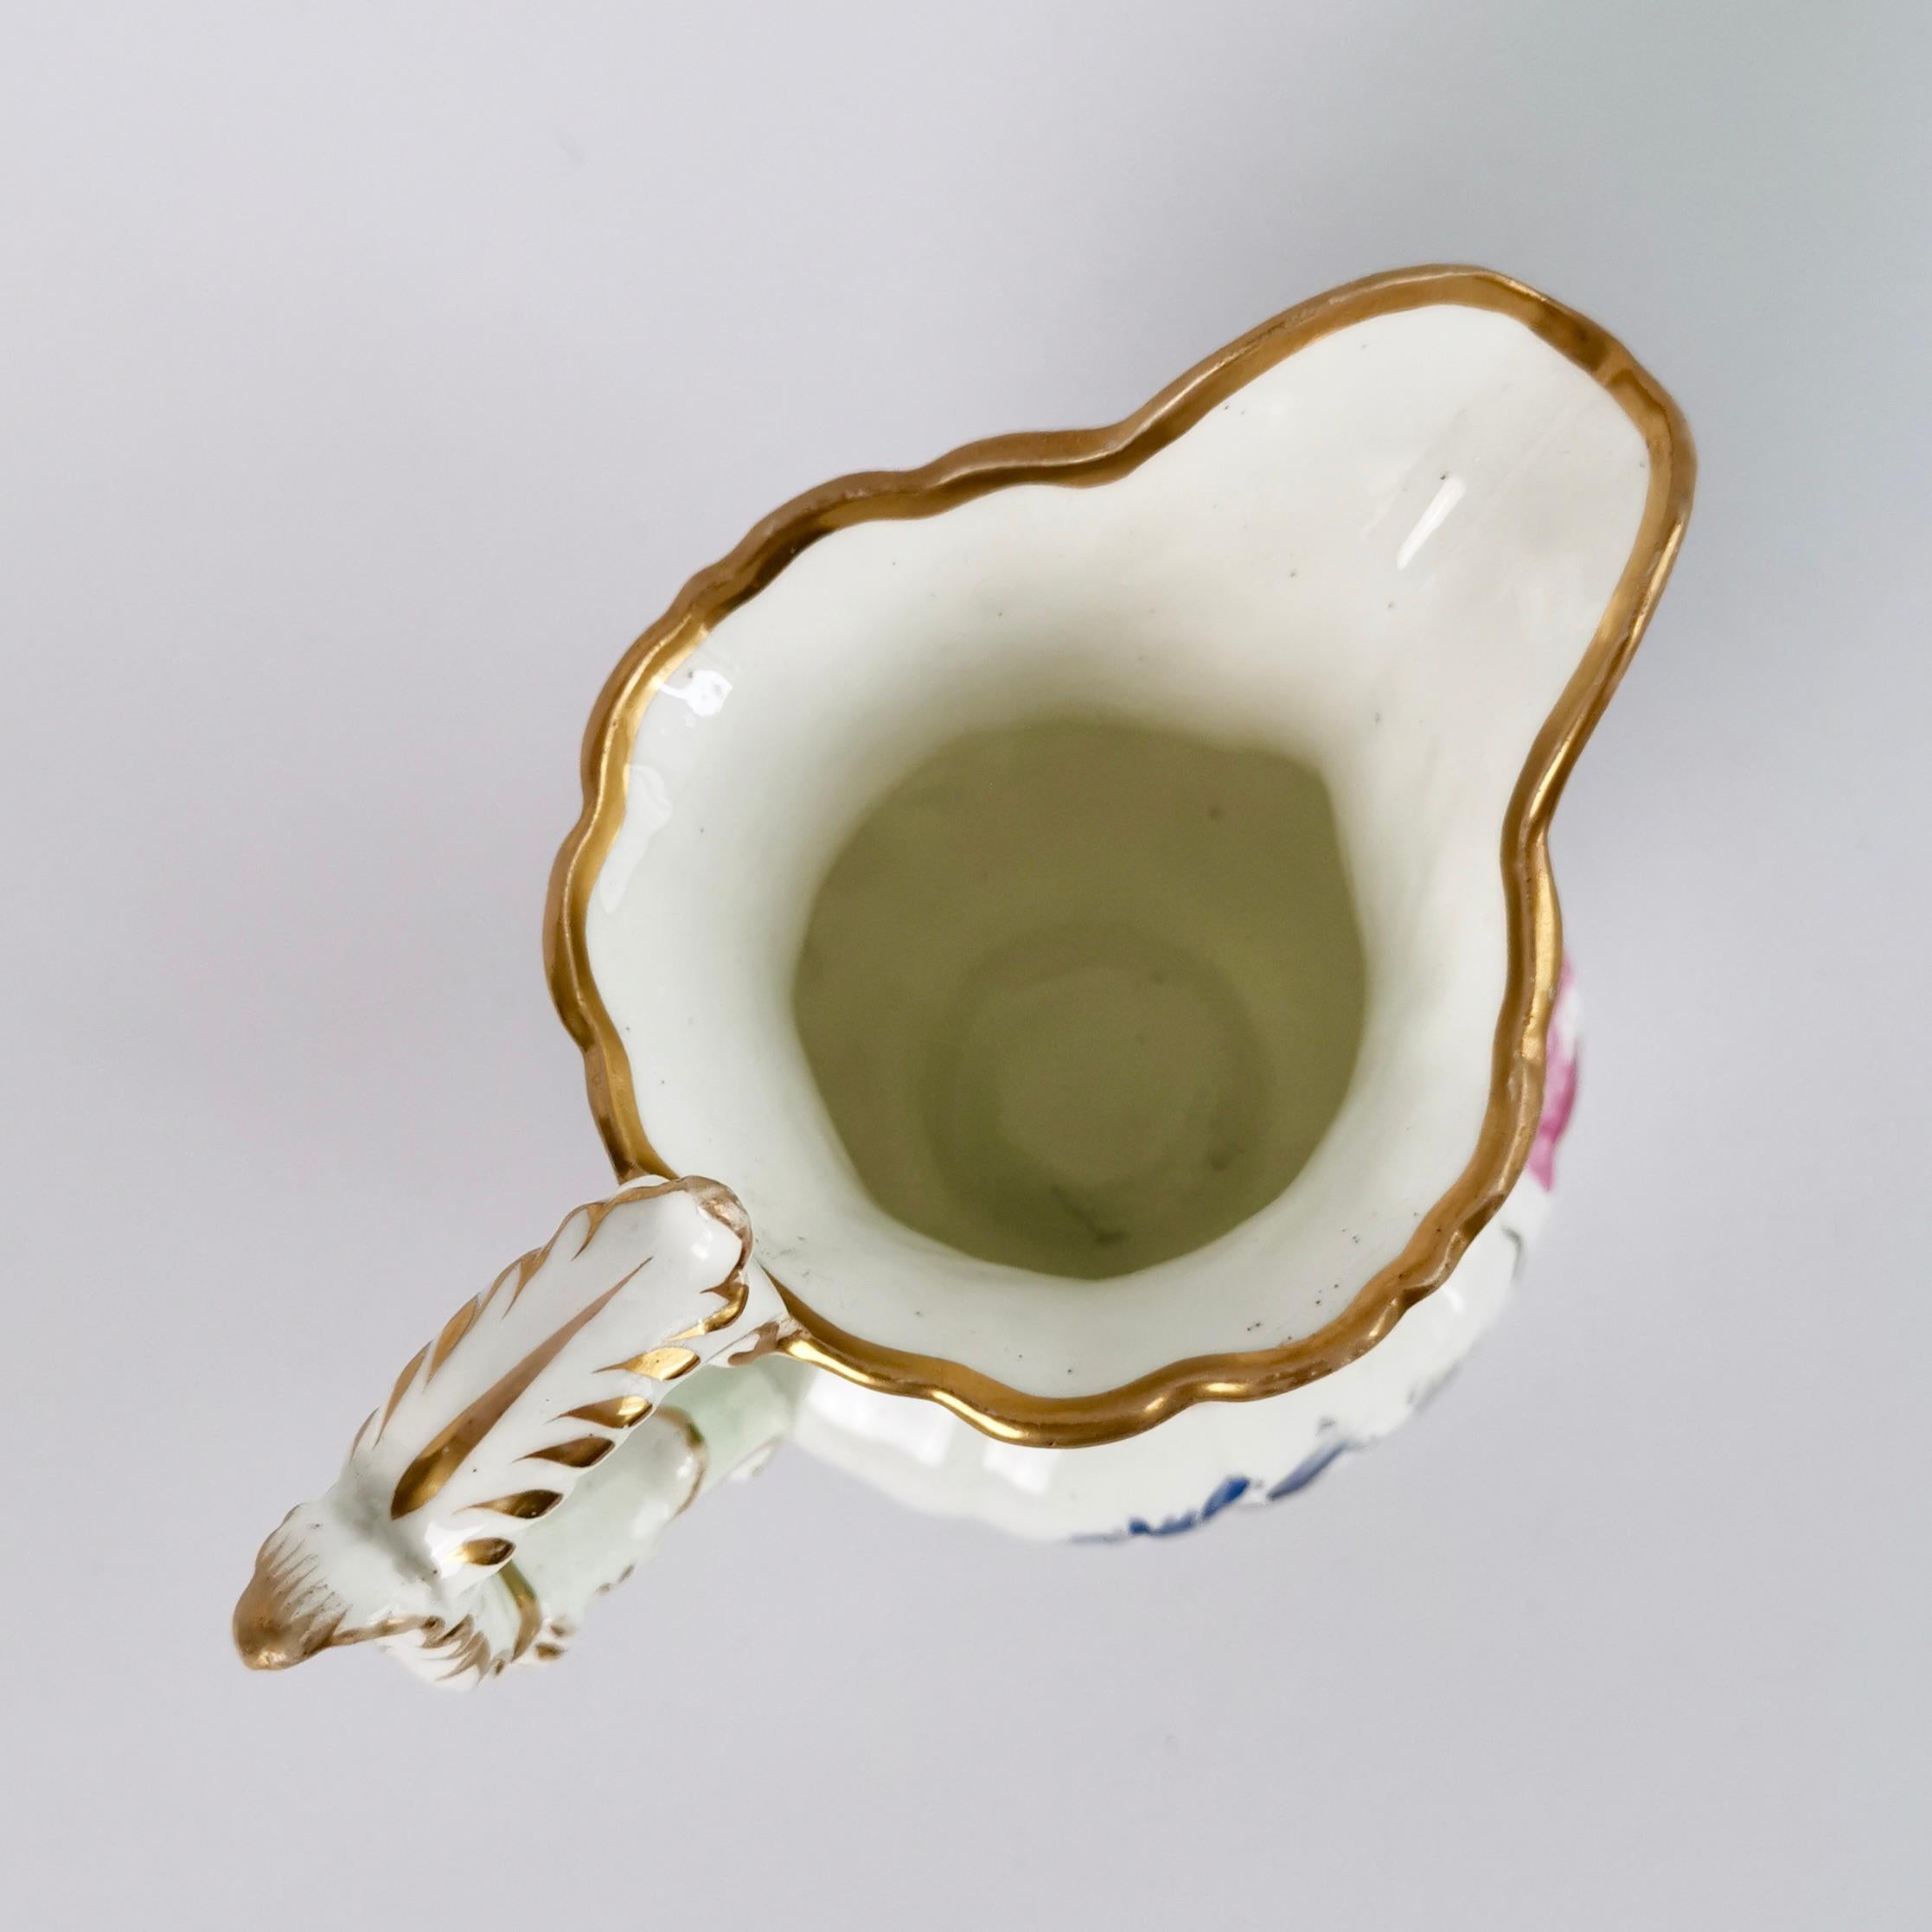 Hilditch Porcelain Pitcher, Apple Green with Hand Painted Flowers, circa 1830 6